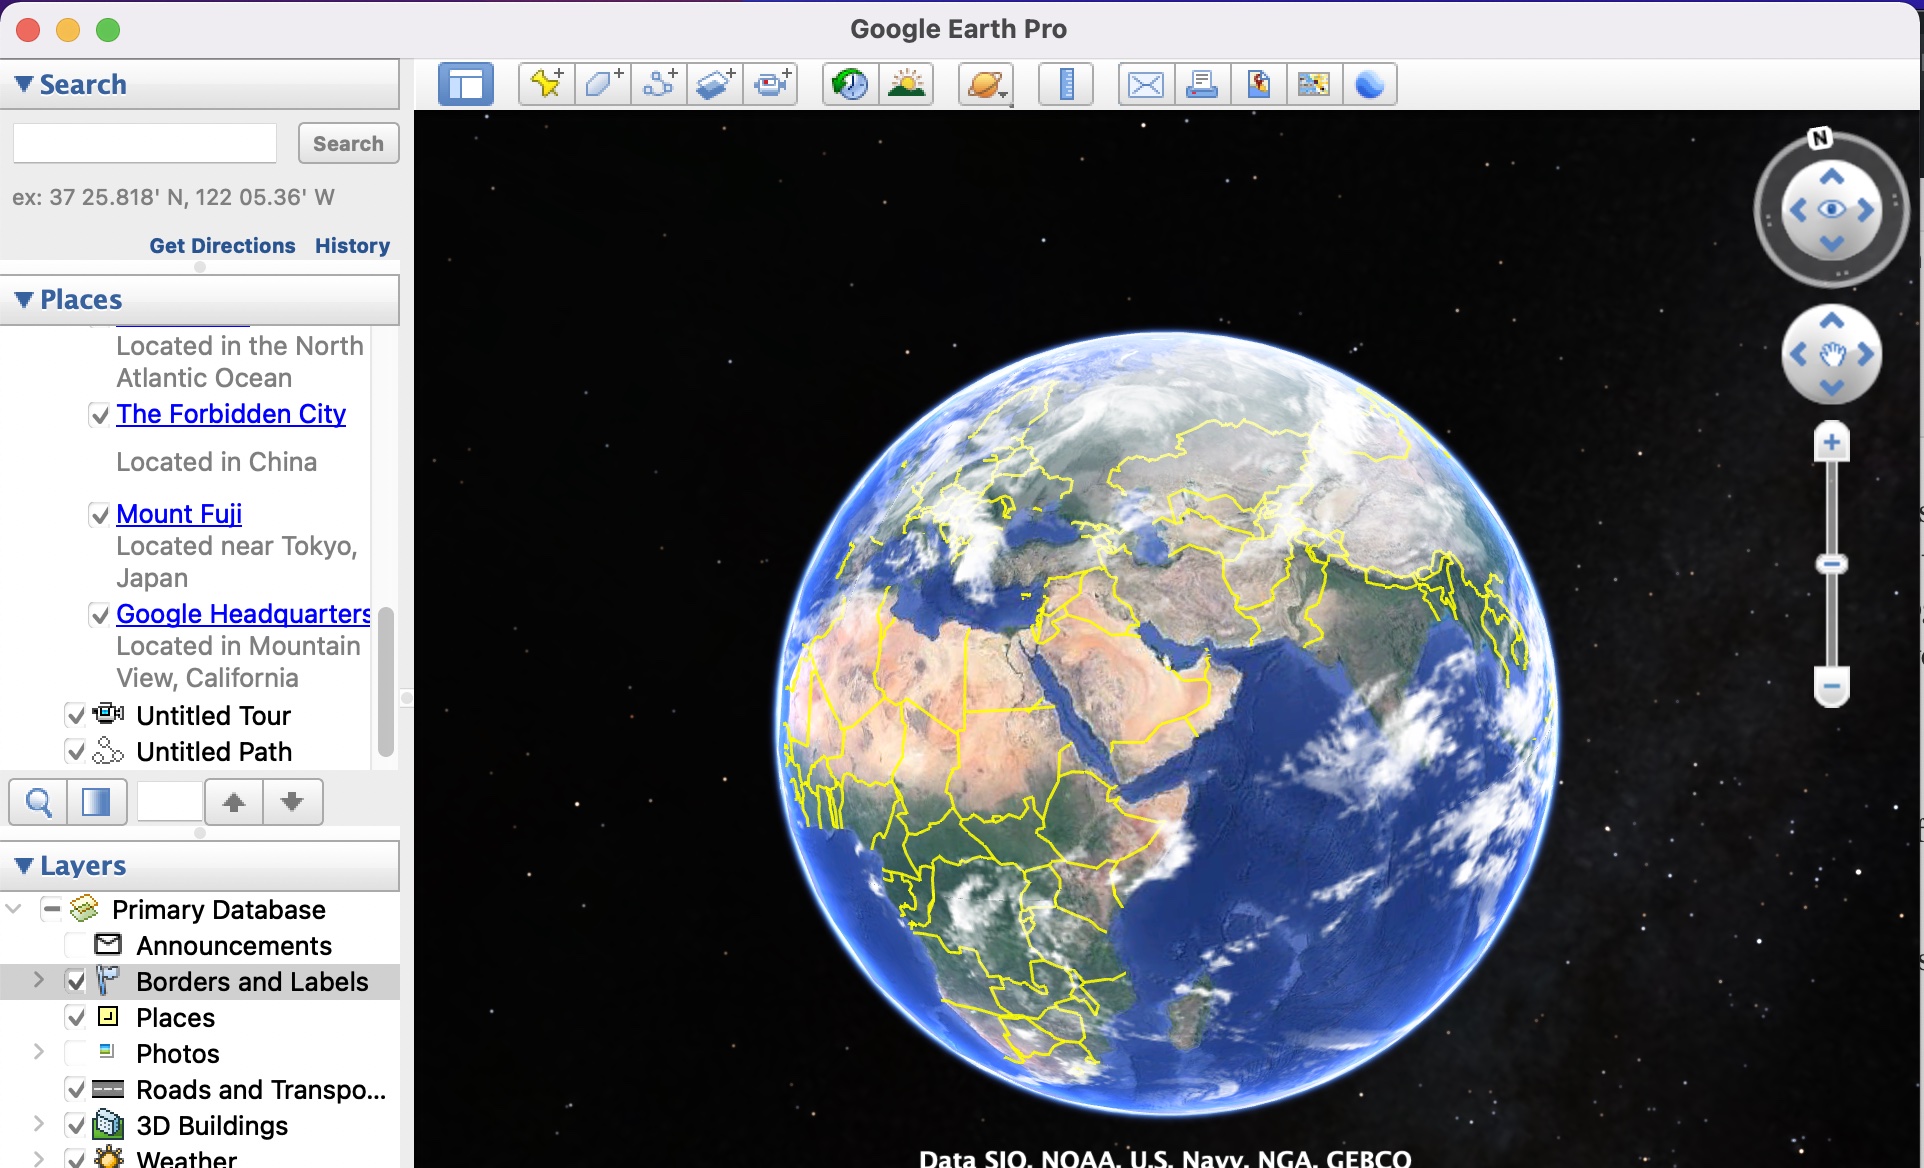 How to draw a circle around an area on Google Earth